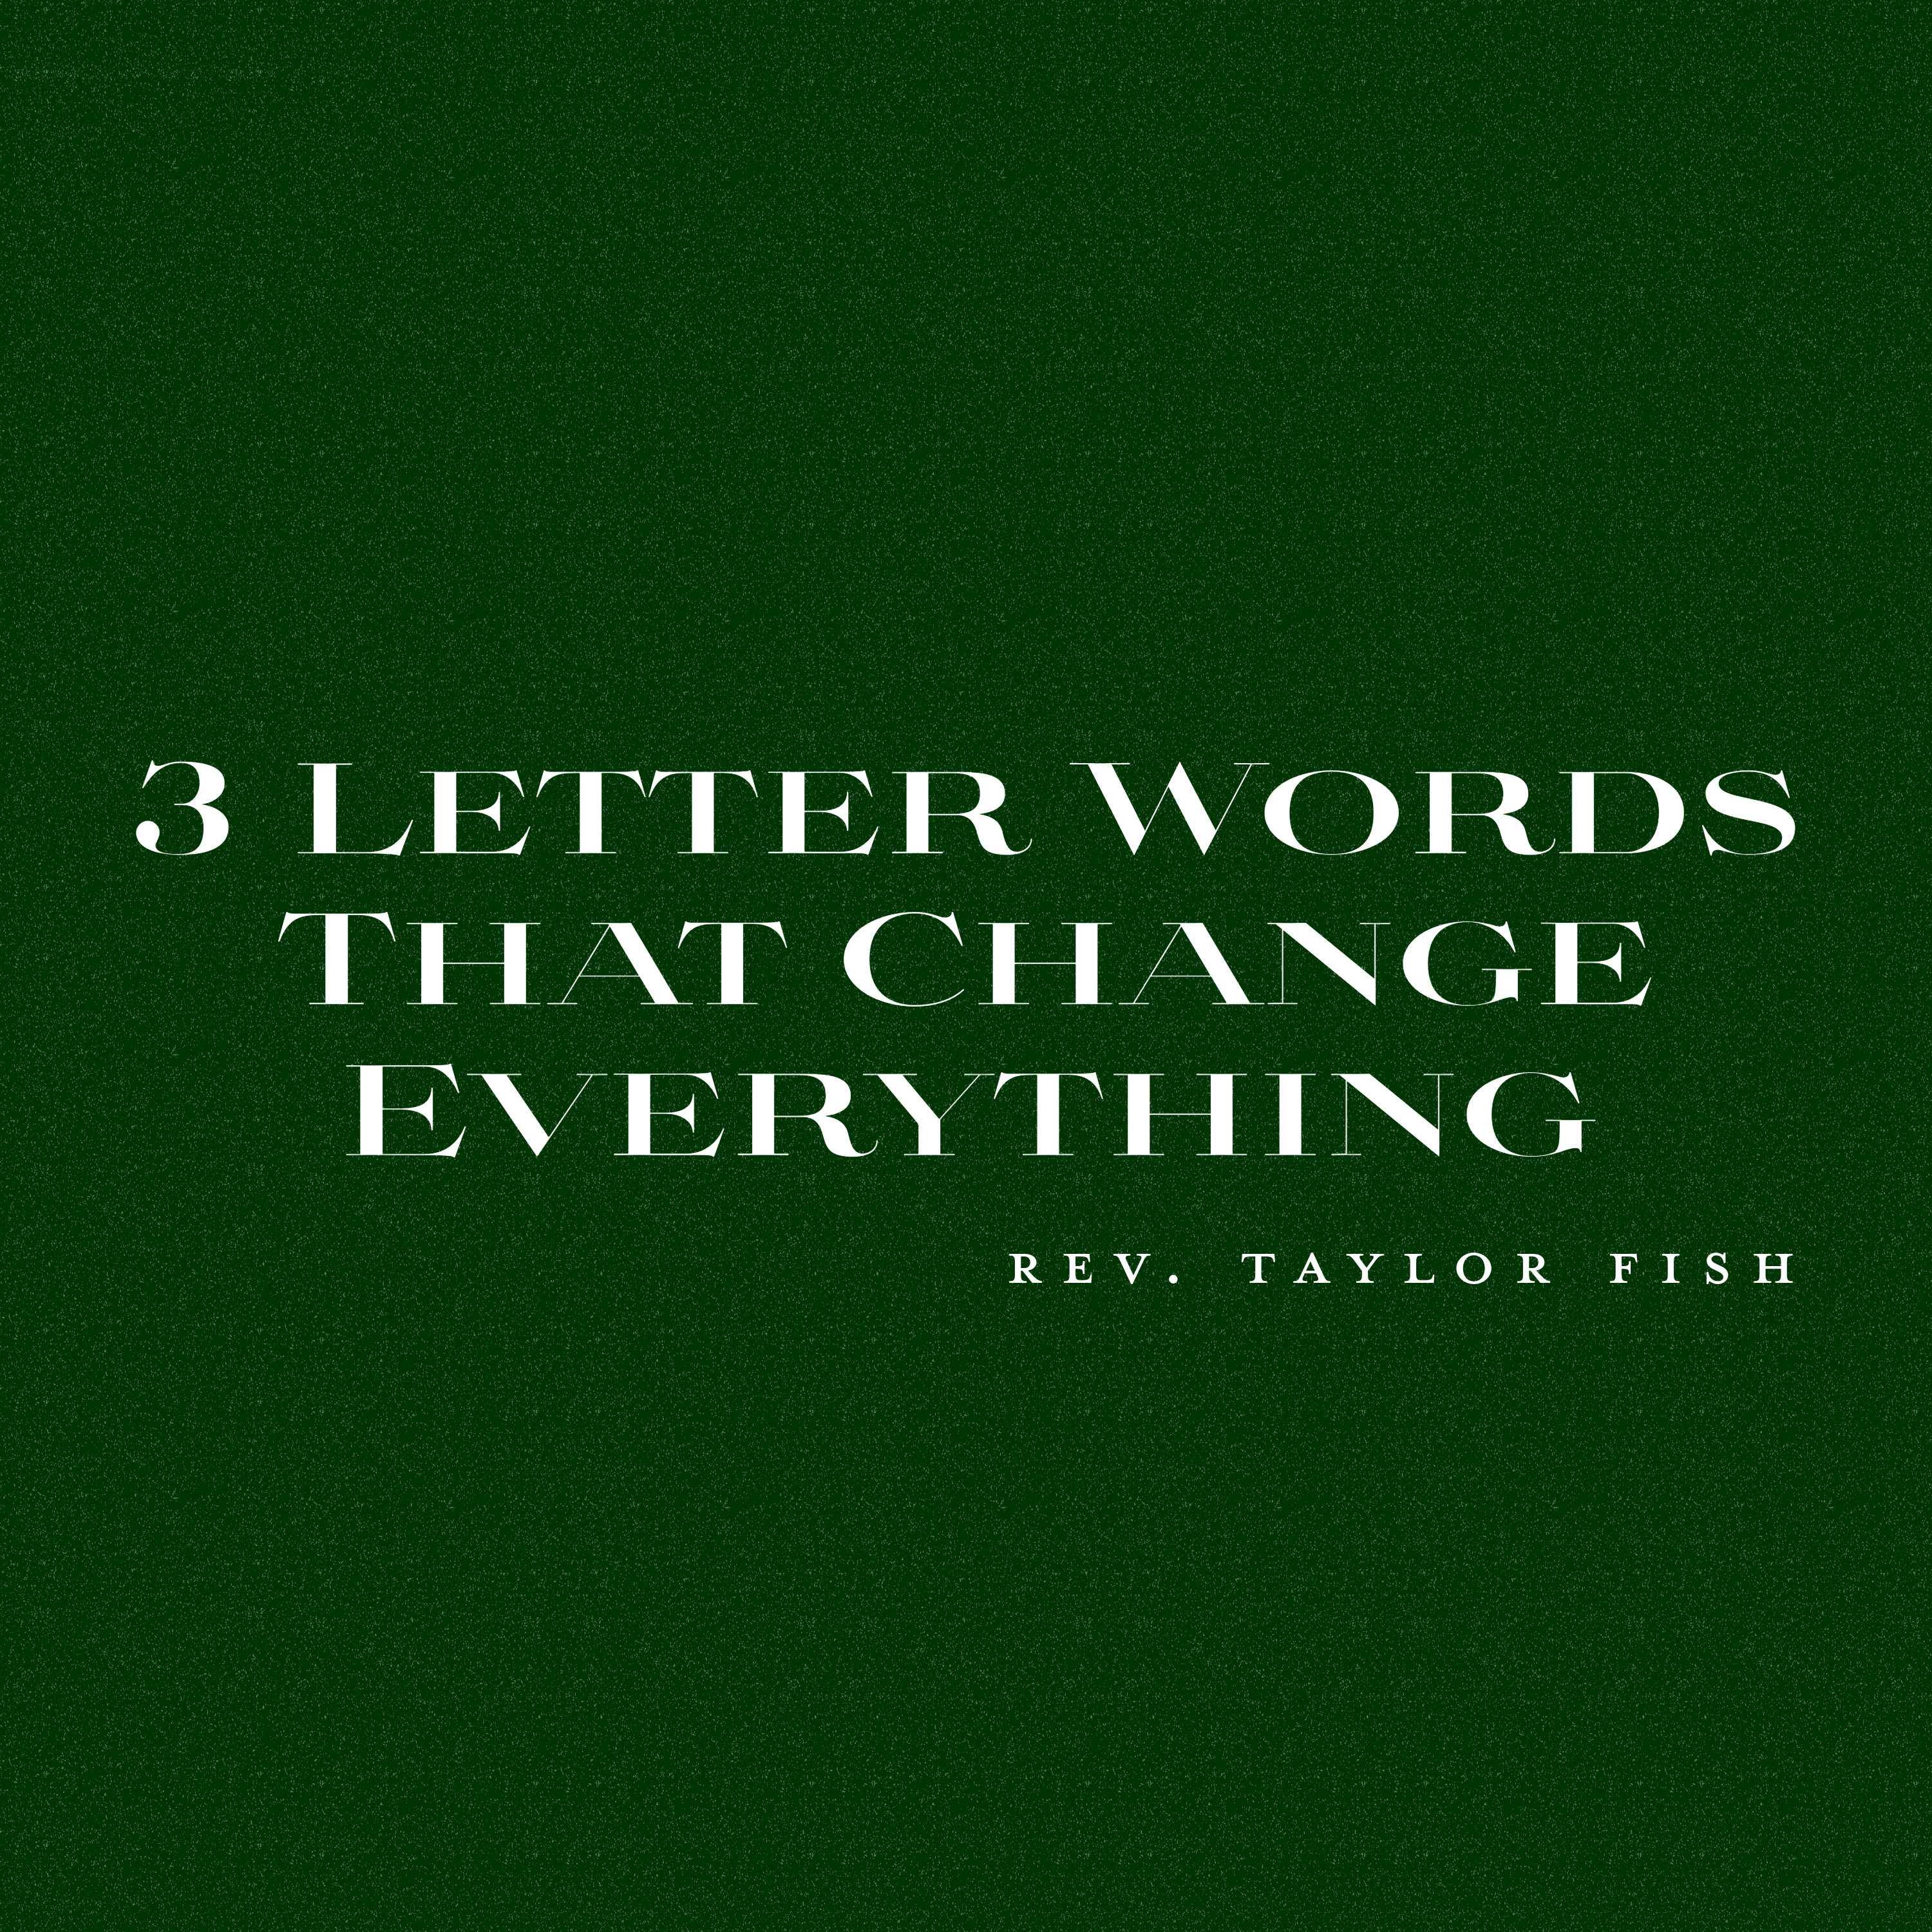 3 Letter Words That Change Everything